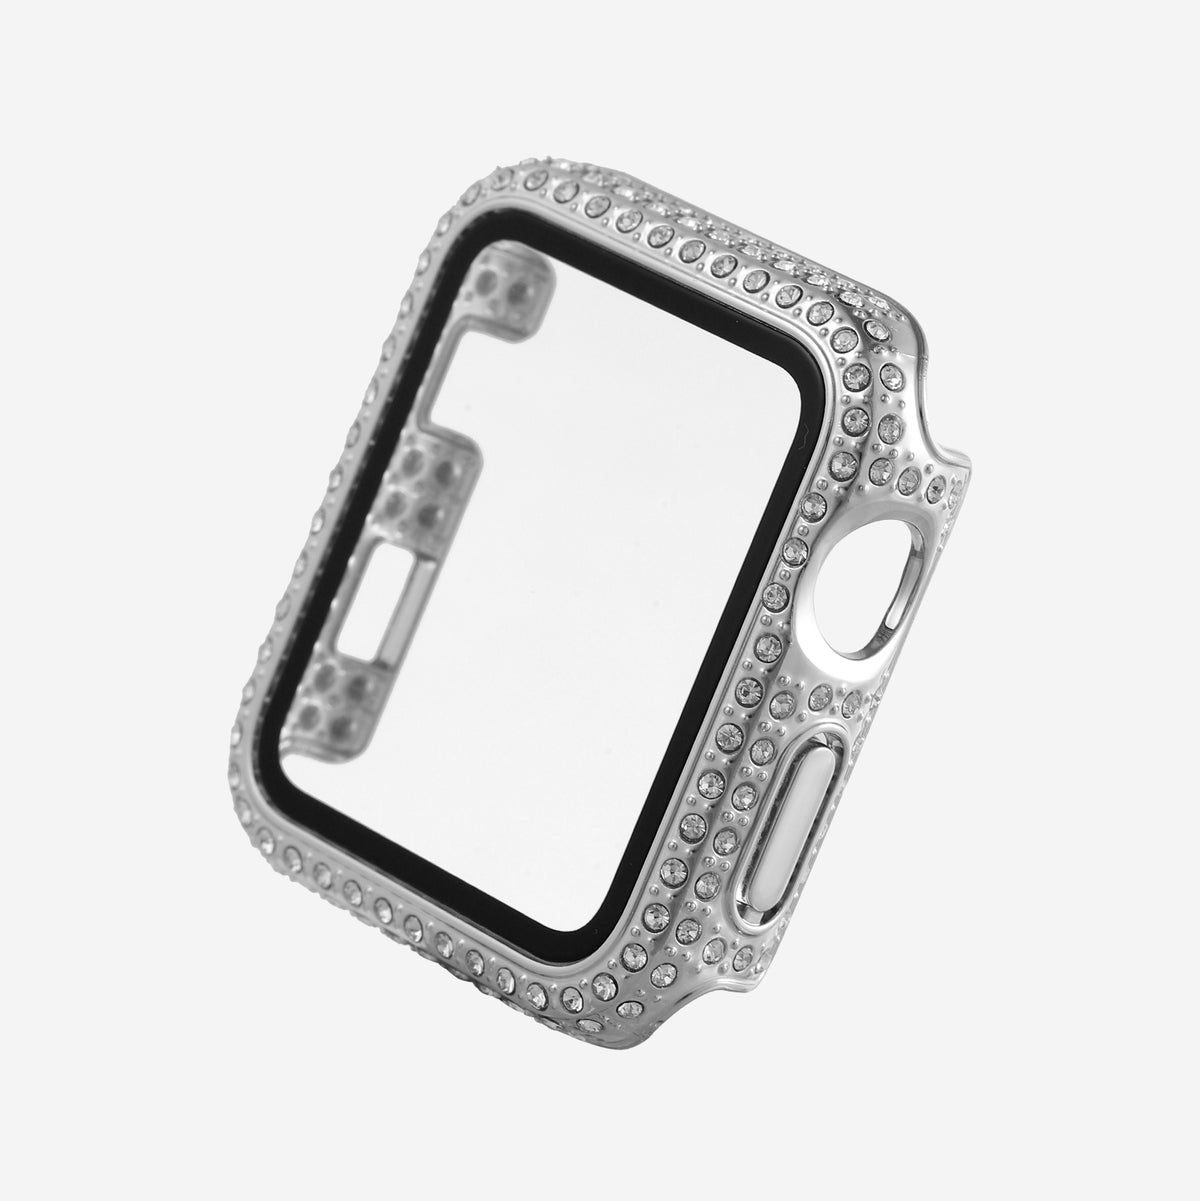 Apple Watch Crystal Screen Protector Case - Silver